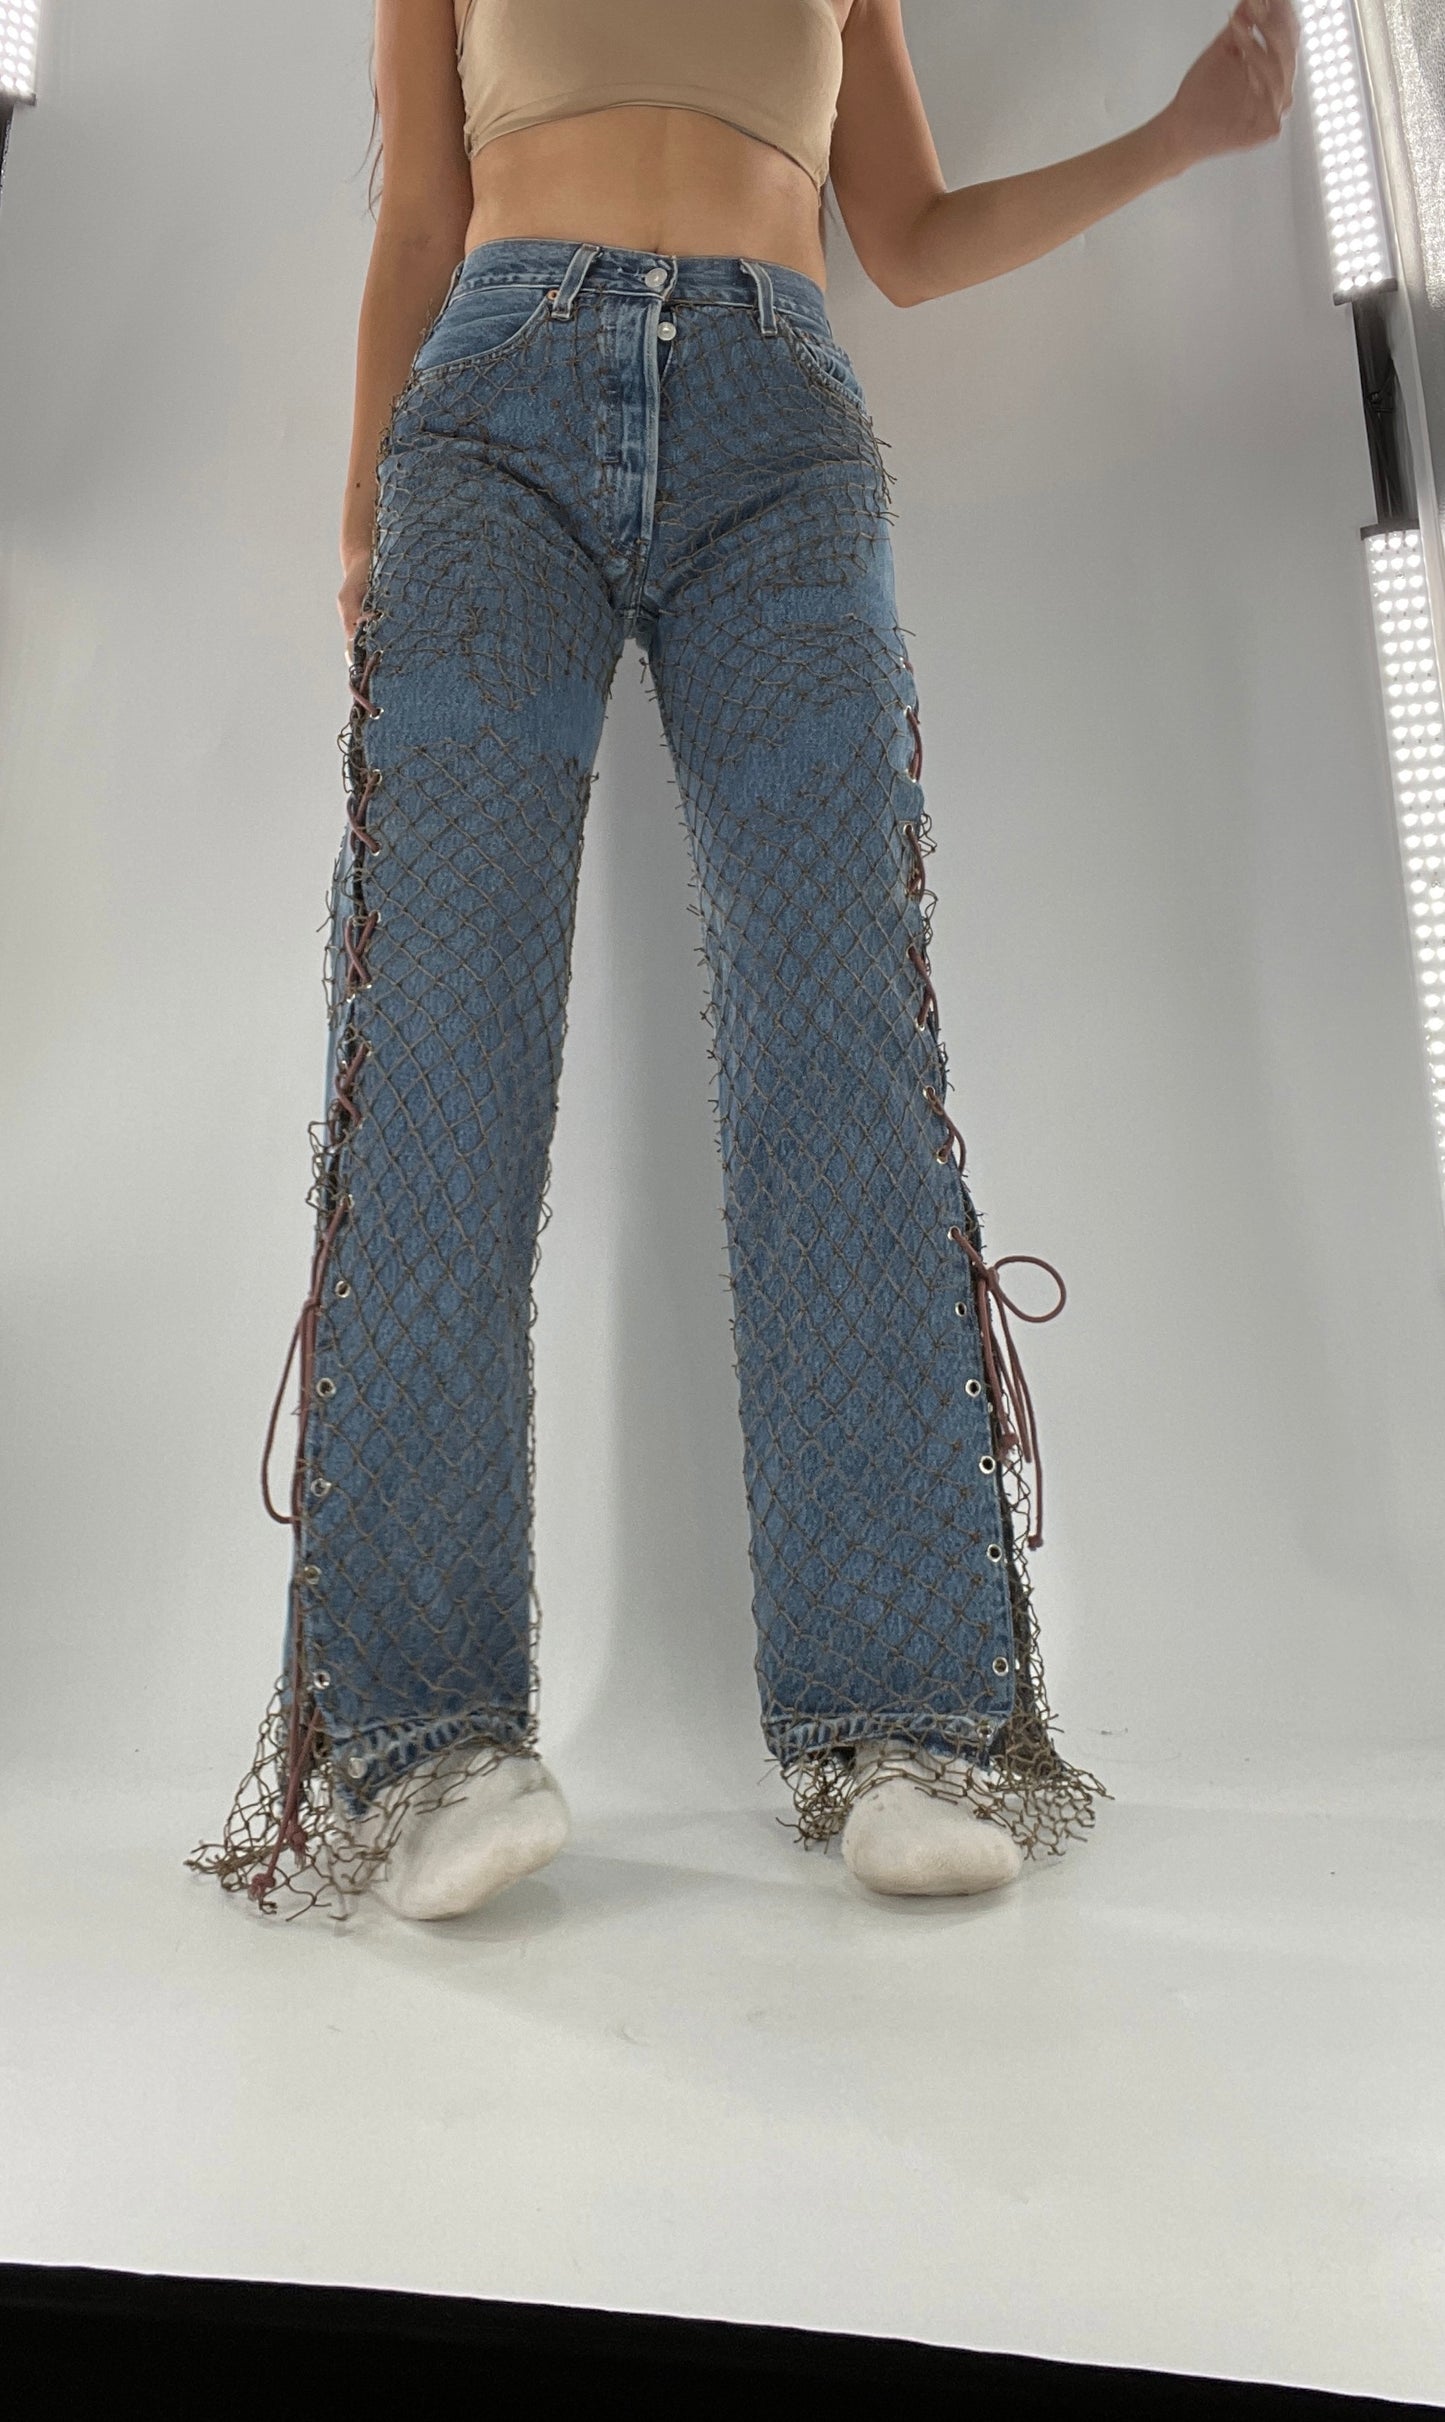 Custom - Fishnet Levi’s with Grommets and Lace Up Sides (Waist 29 Length 30) Fits Like a 26